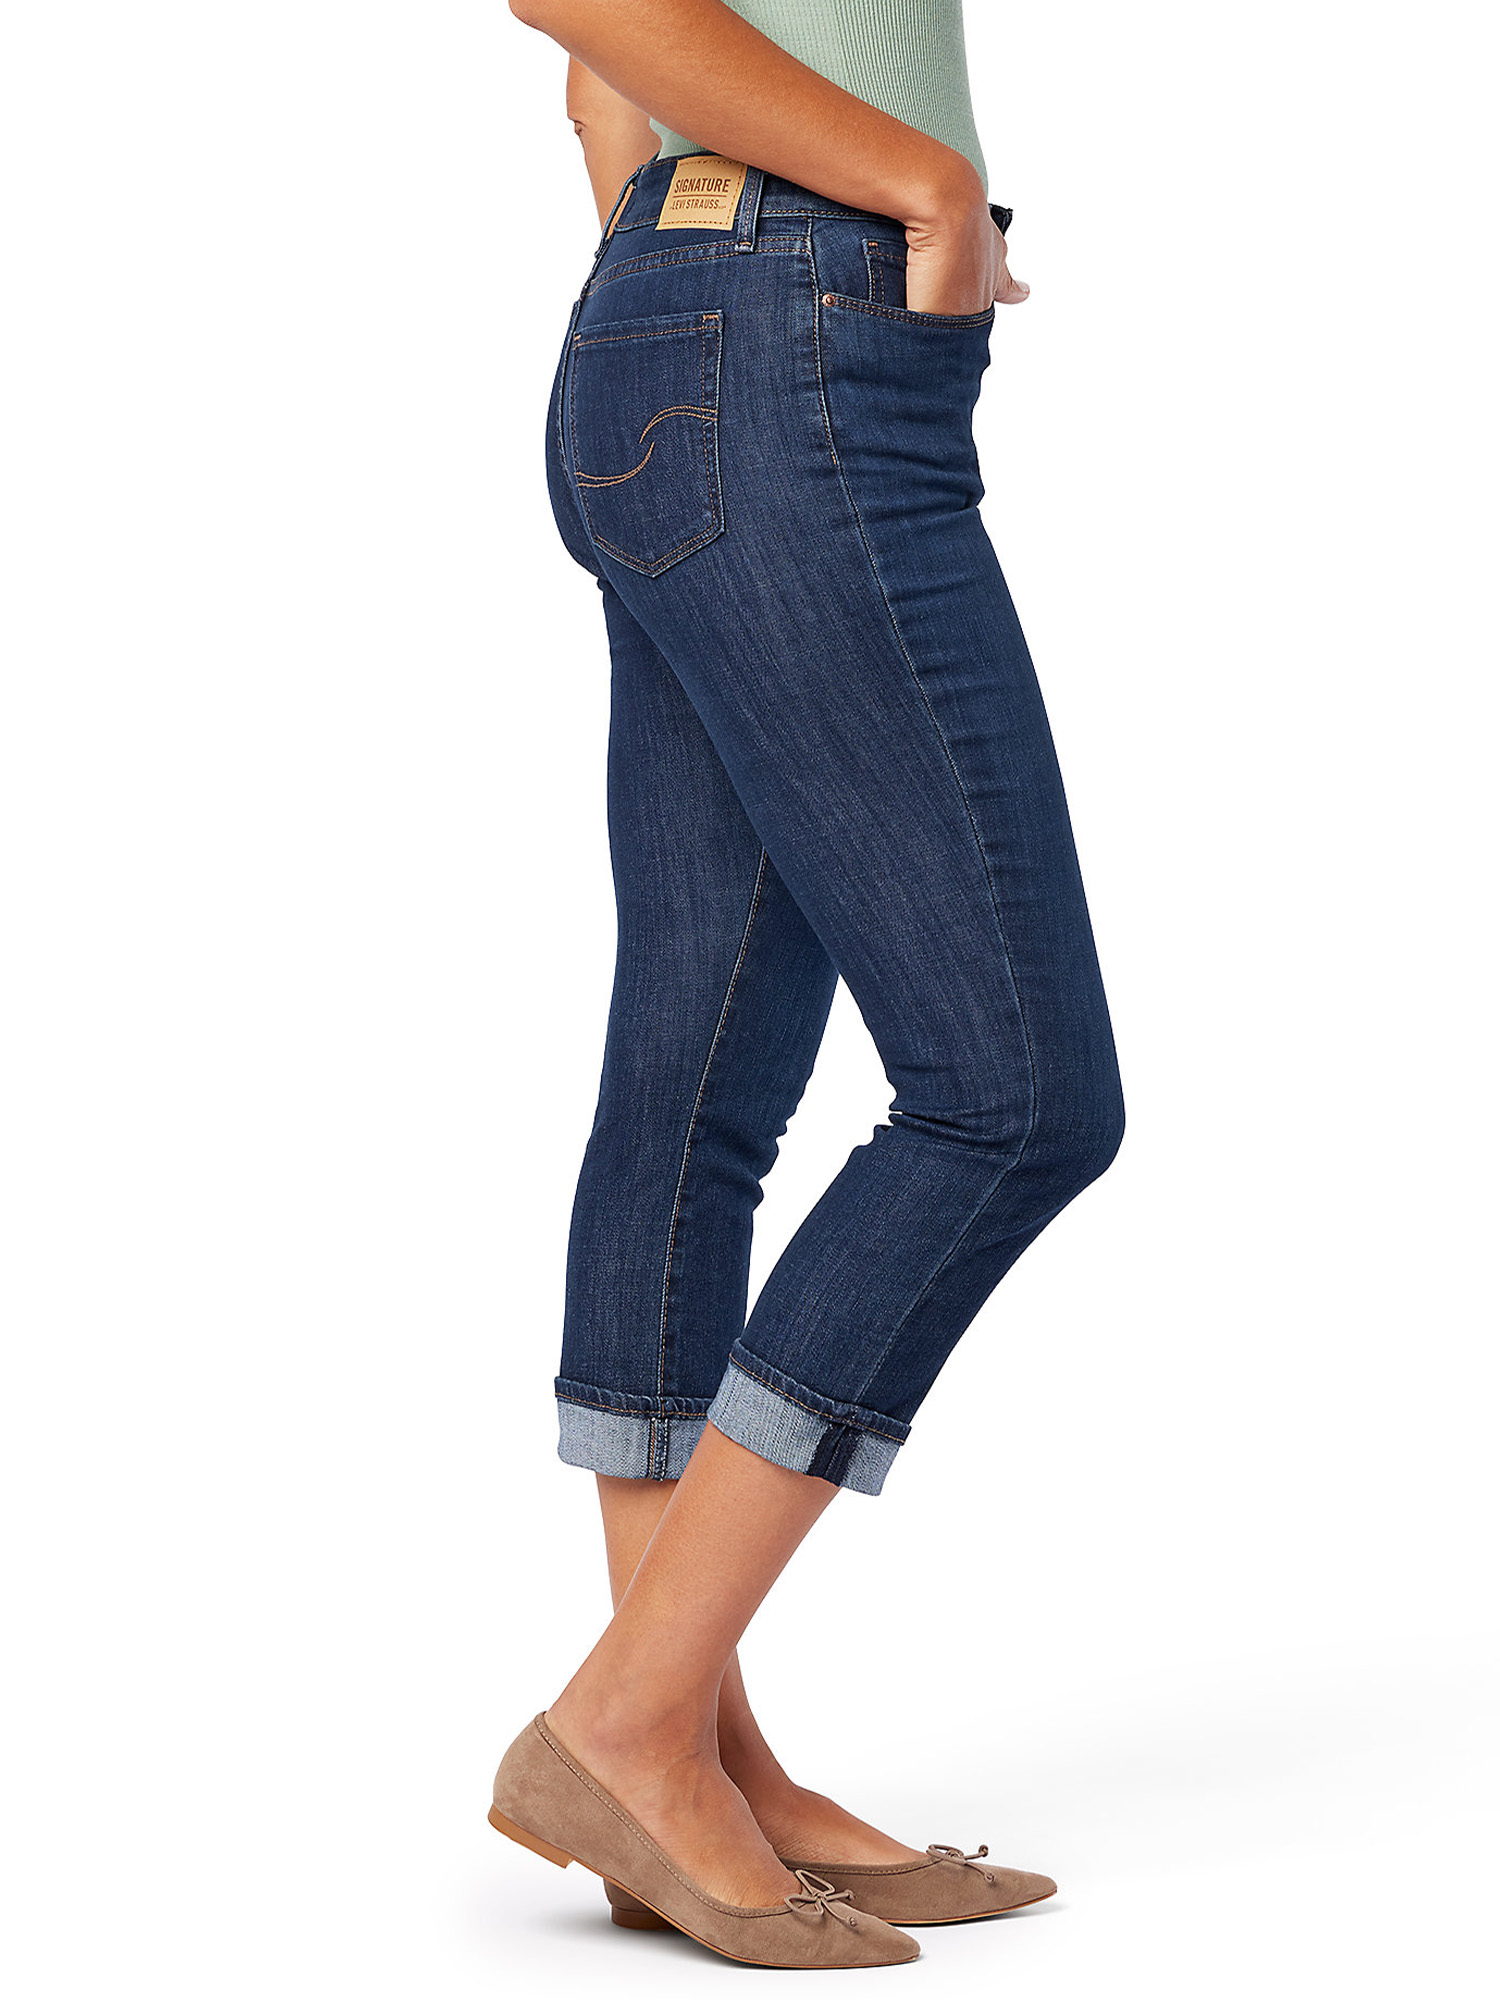 Signature by Levi Strauss & Co. Women's and Women's Plus Mid Rise Capri Jeans, Sizes 0-28 - image 4 of 5